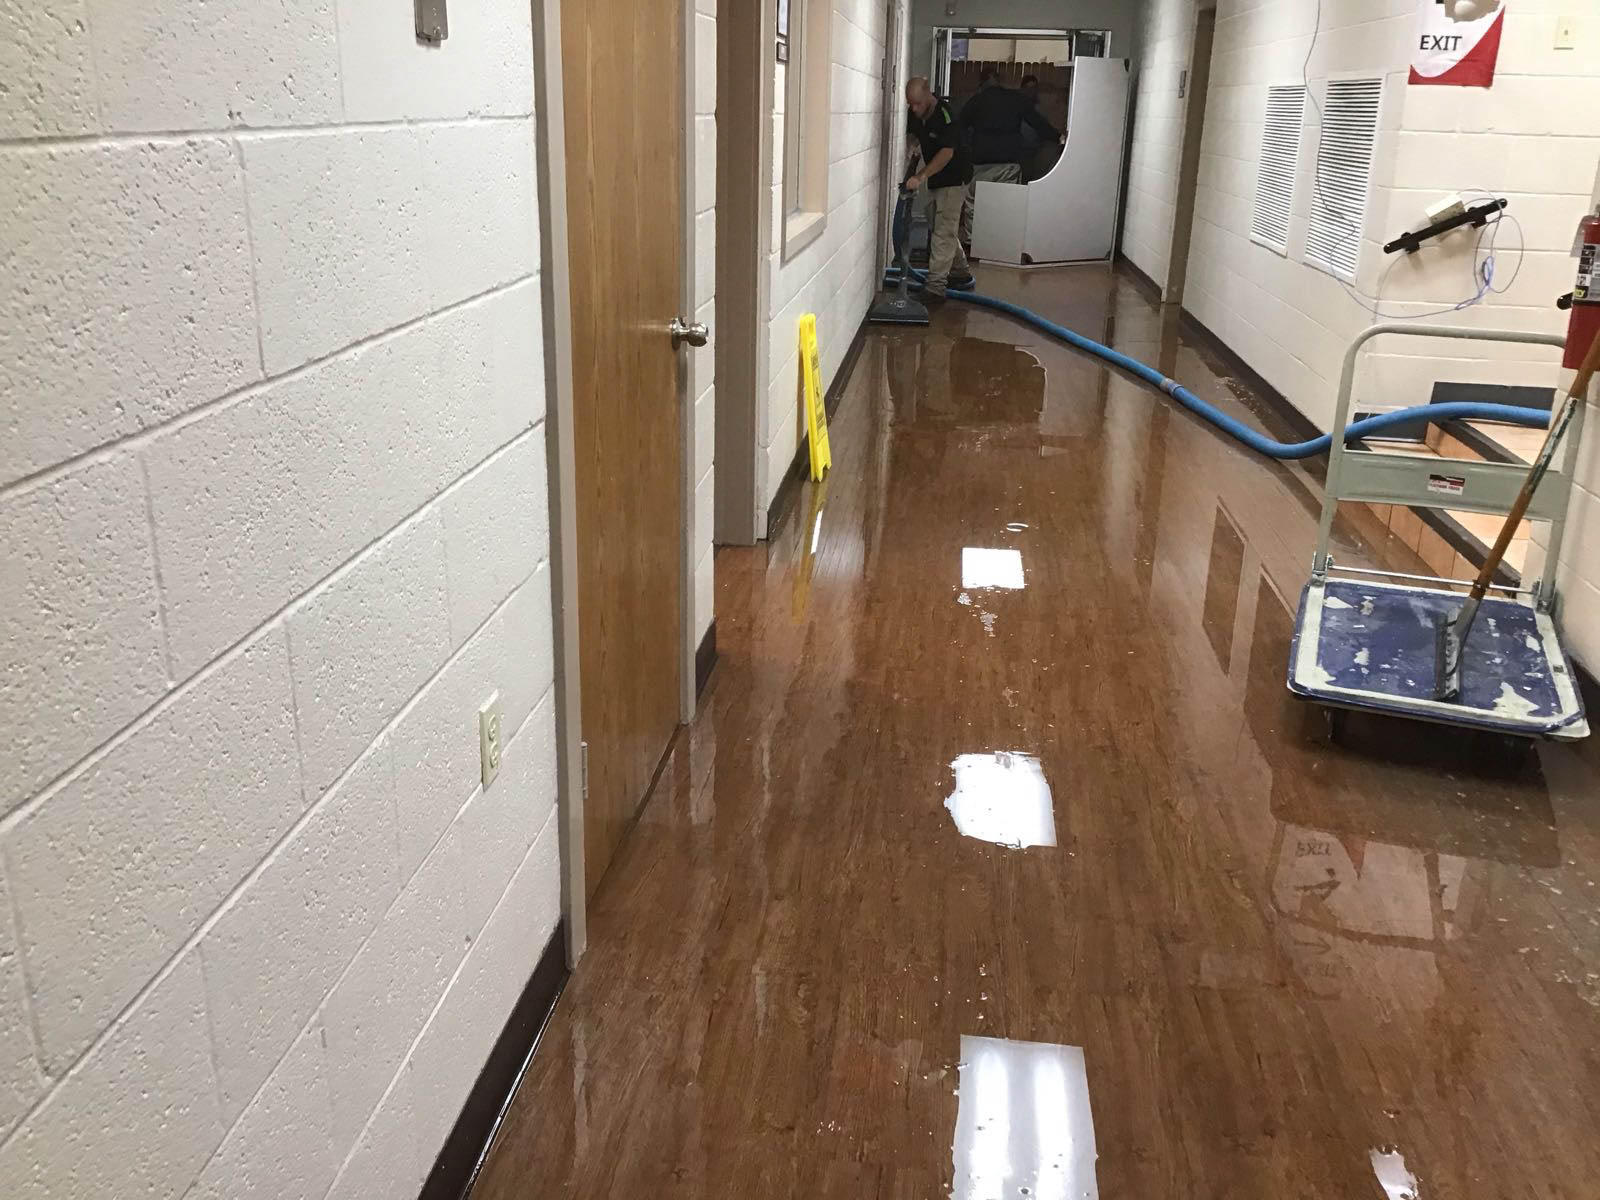 Office flooded? Trying to reopen? Contact SERVPRO of Tyler and we will be on our way in a flash! 24 hour emergency service is our specialty.